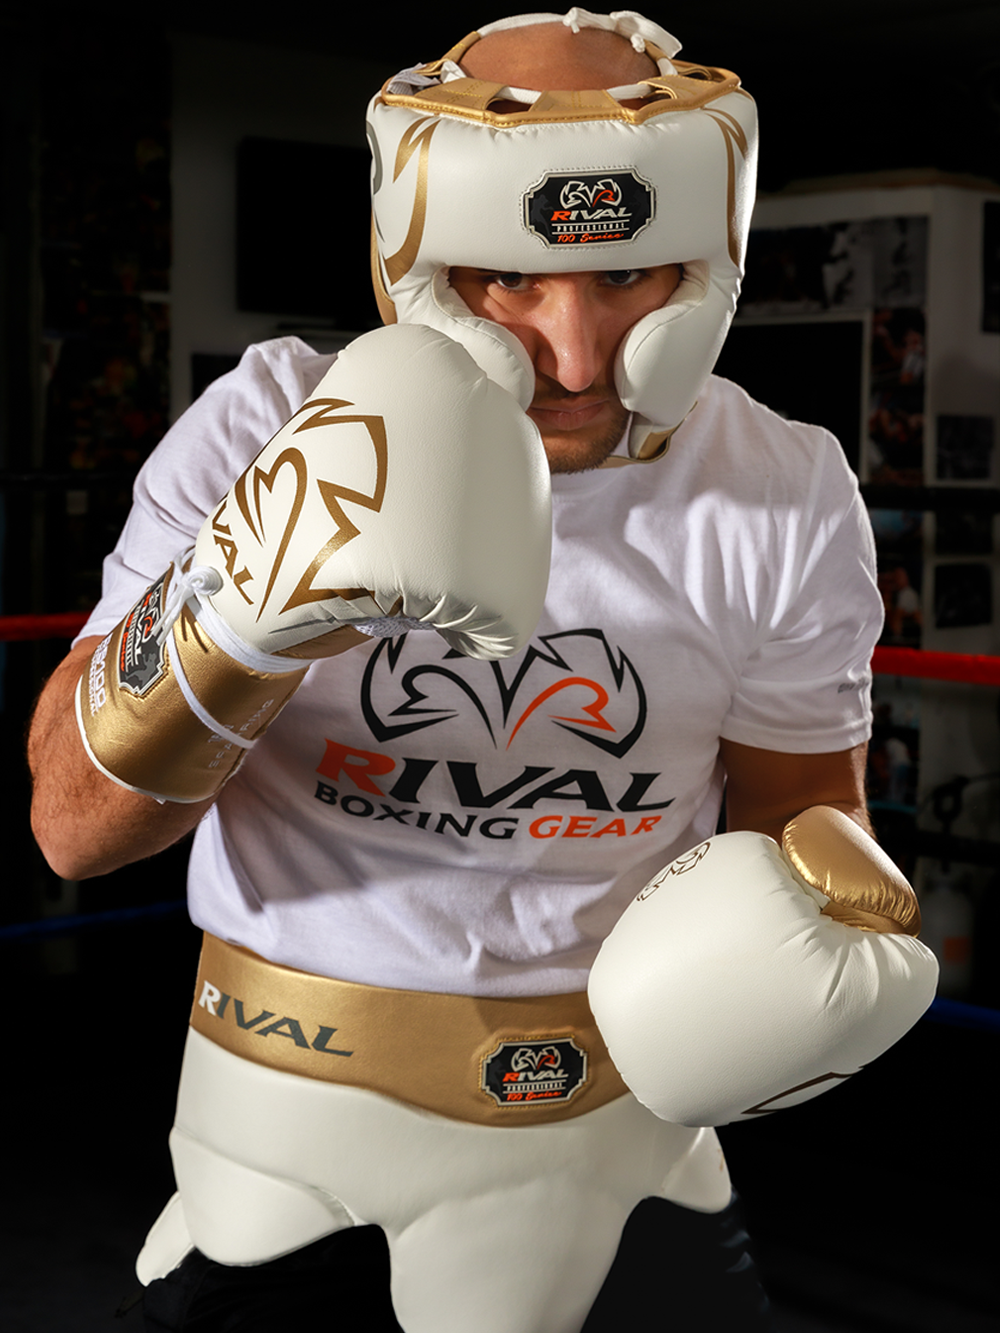 Rival 100 series boxing gear white and gold